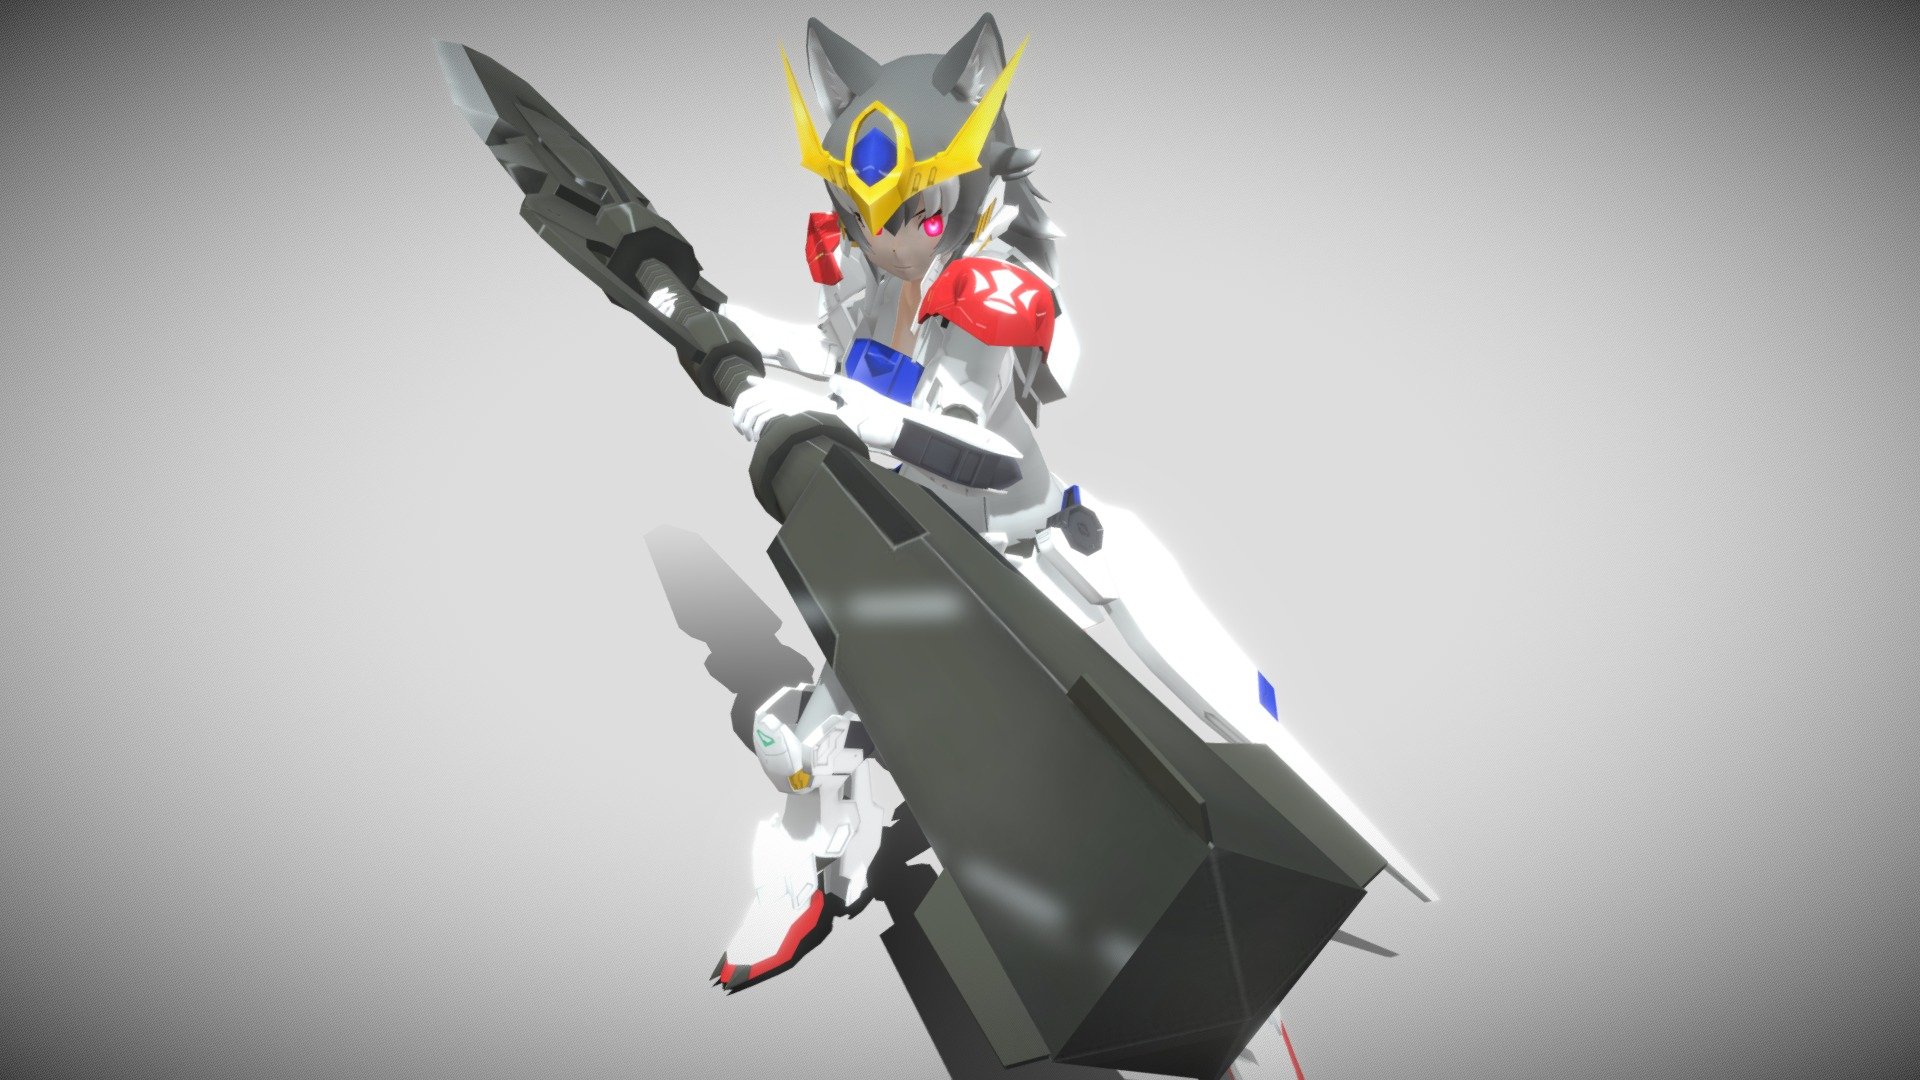 Summary: Gray Lupus Another avatar I made for VRChat and put together base on Gundam Barbatos Lupus(Wolf) and Gray Wolf from Kemono Friends.

Model Base



Gray Wolf by: へな羊(@hena_sheep)



Barbatos Lupus by: タケワカ



Support: ko-fi.com/nemikaiser
Patreon: patreon.com/FenrirKaiser - ASW-G-08KF Gray Lupus - 3D model by NemiKaiser (@Nemi.Kaiser) 3d model